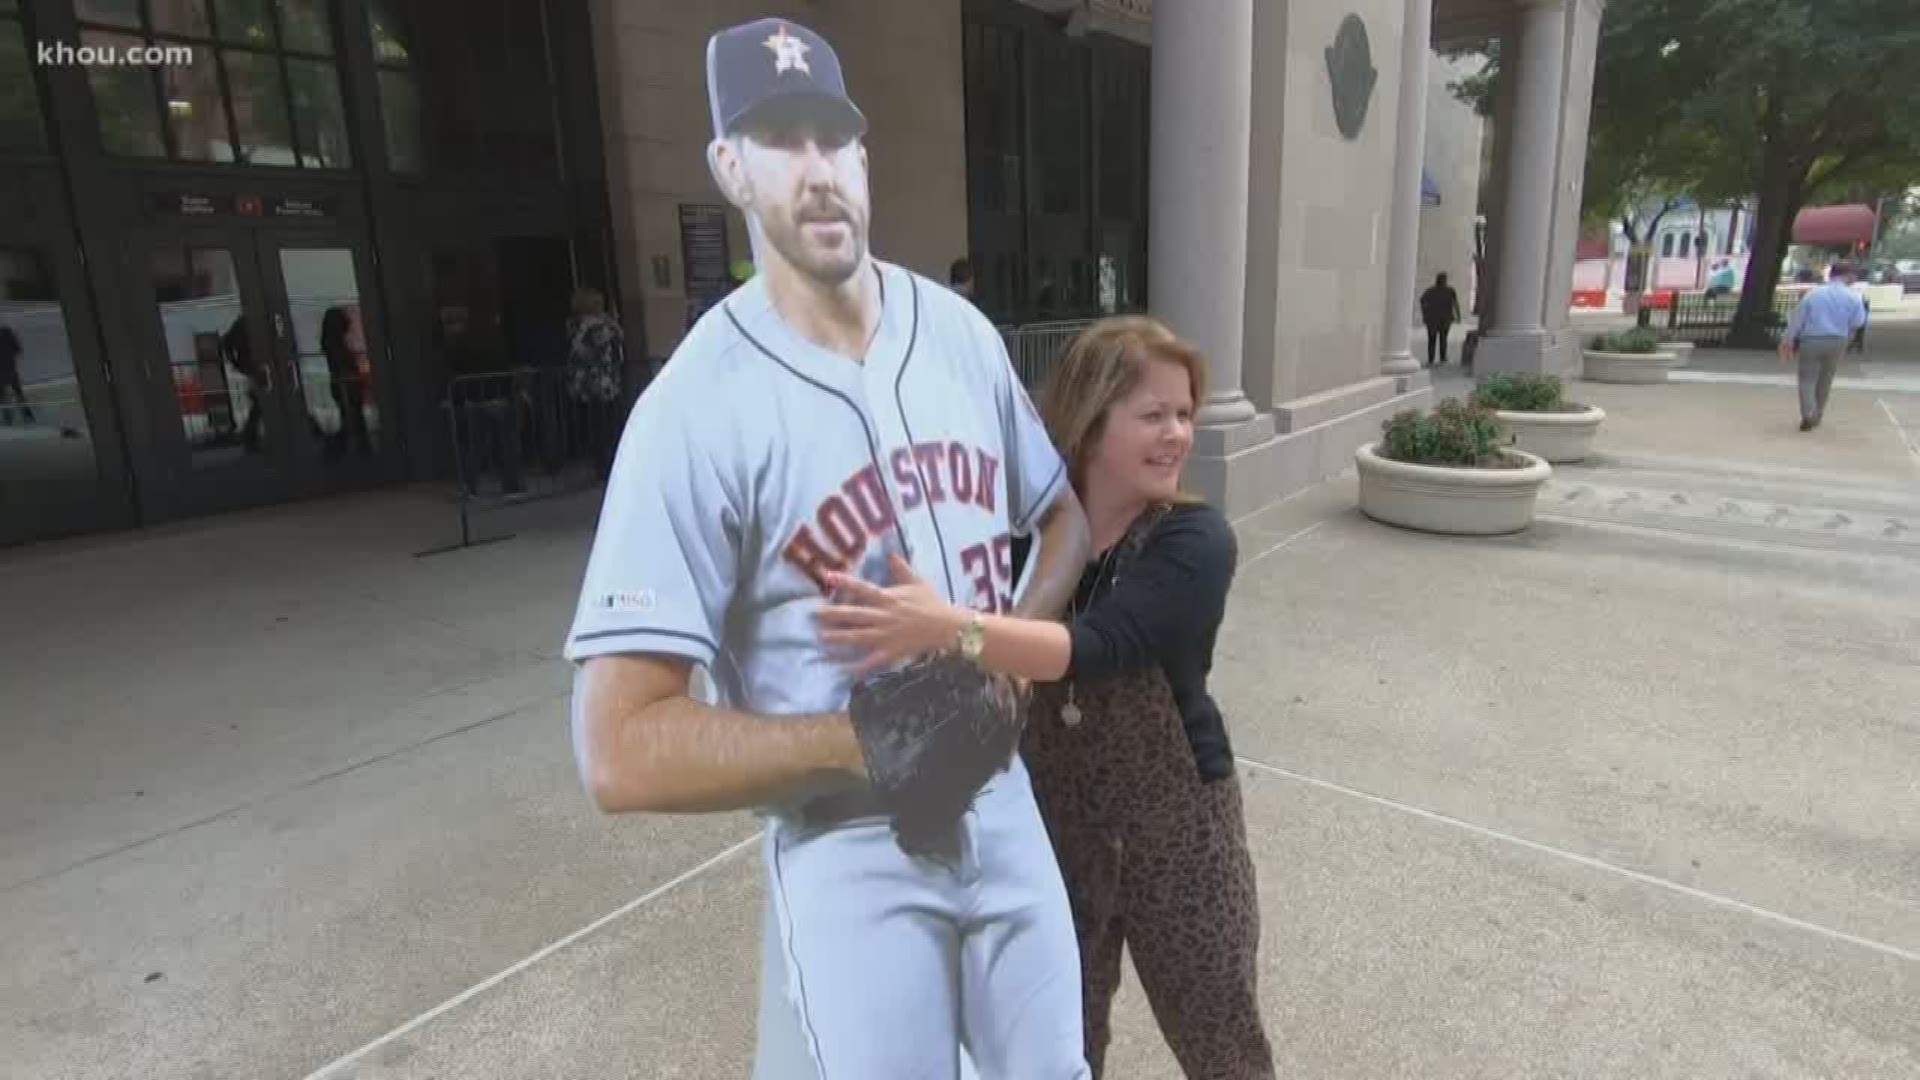 Fans gazed into the eyes of a life-size cutout of J.V. and channeled their inner coach as they shared a motivational message with the Astros pitcher.